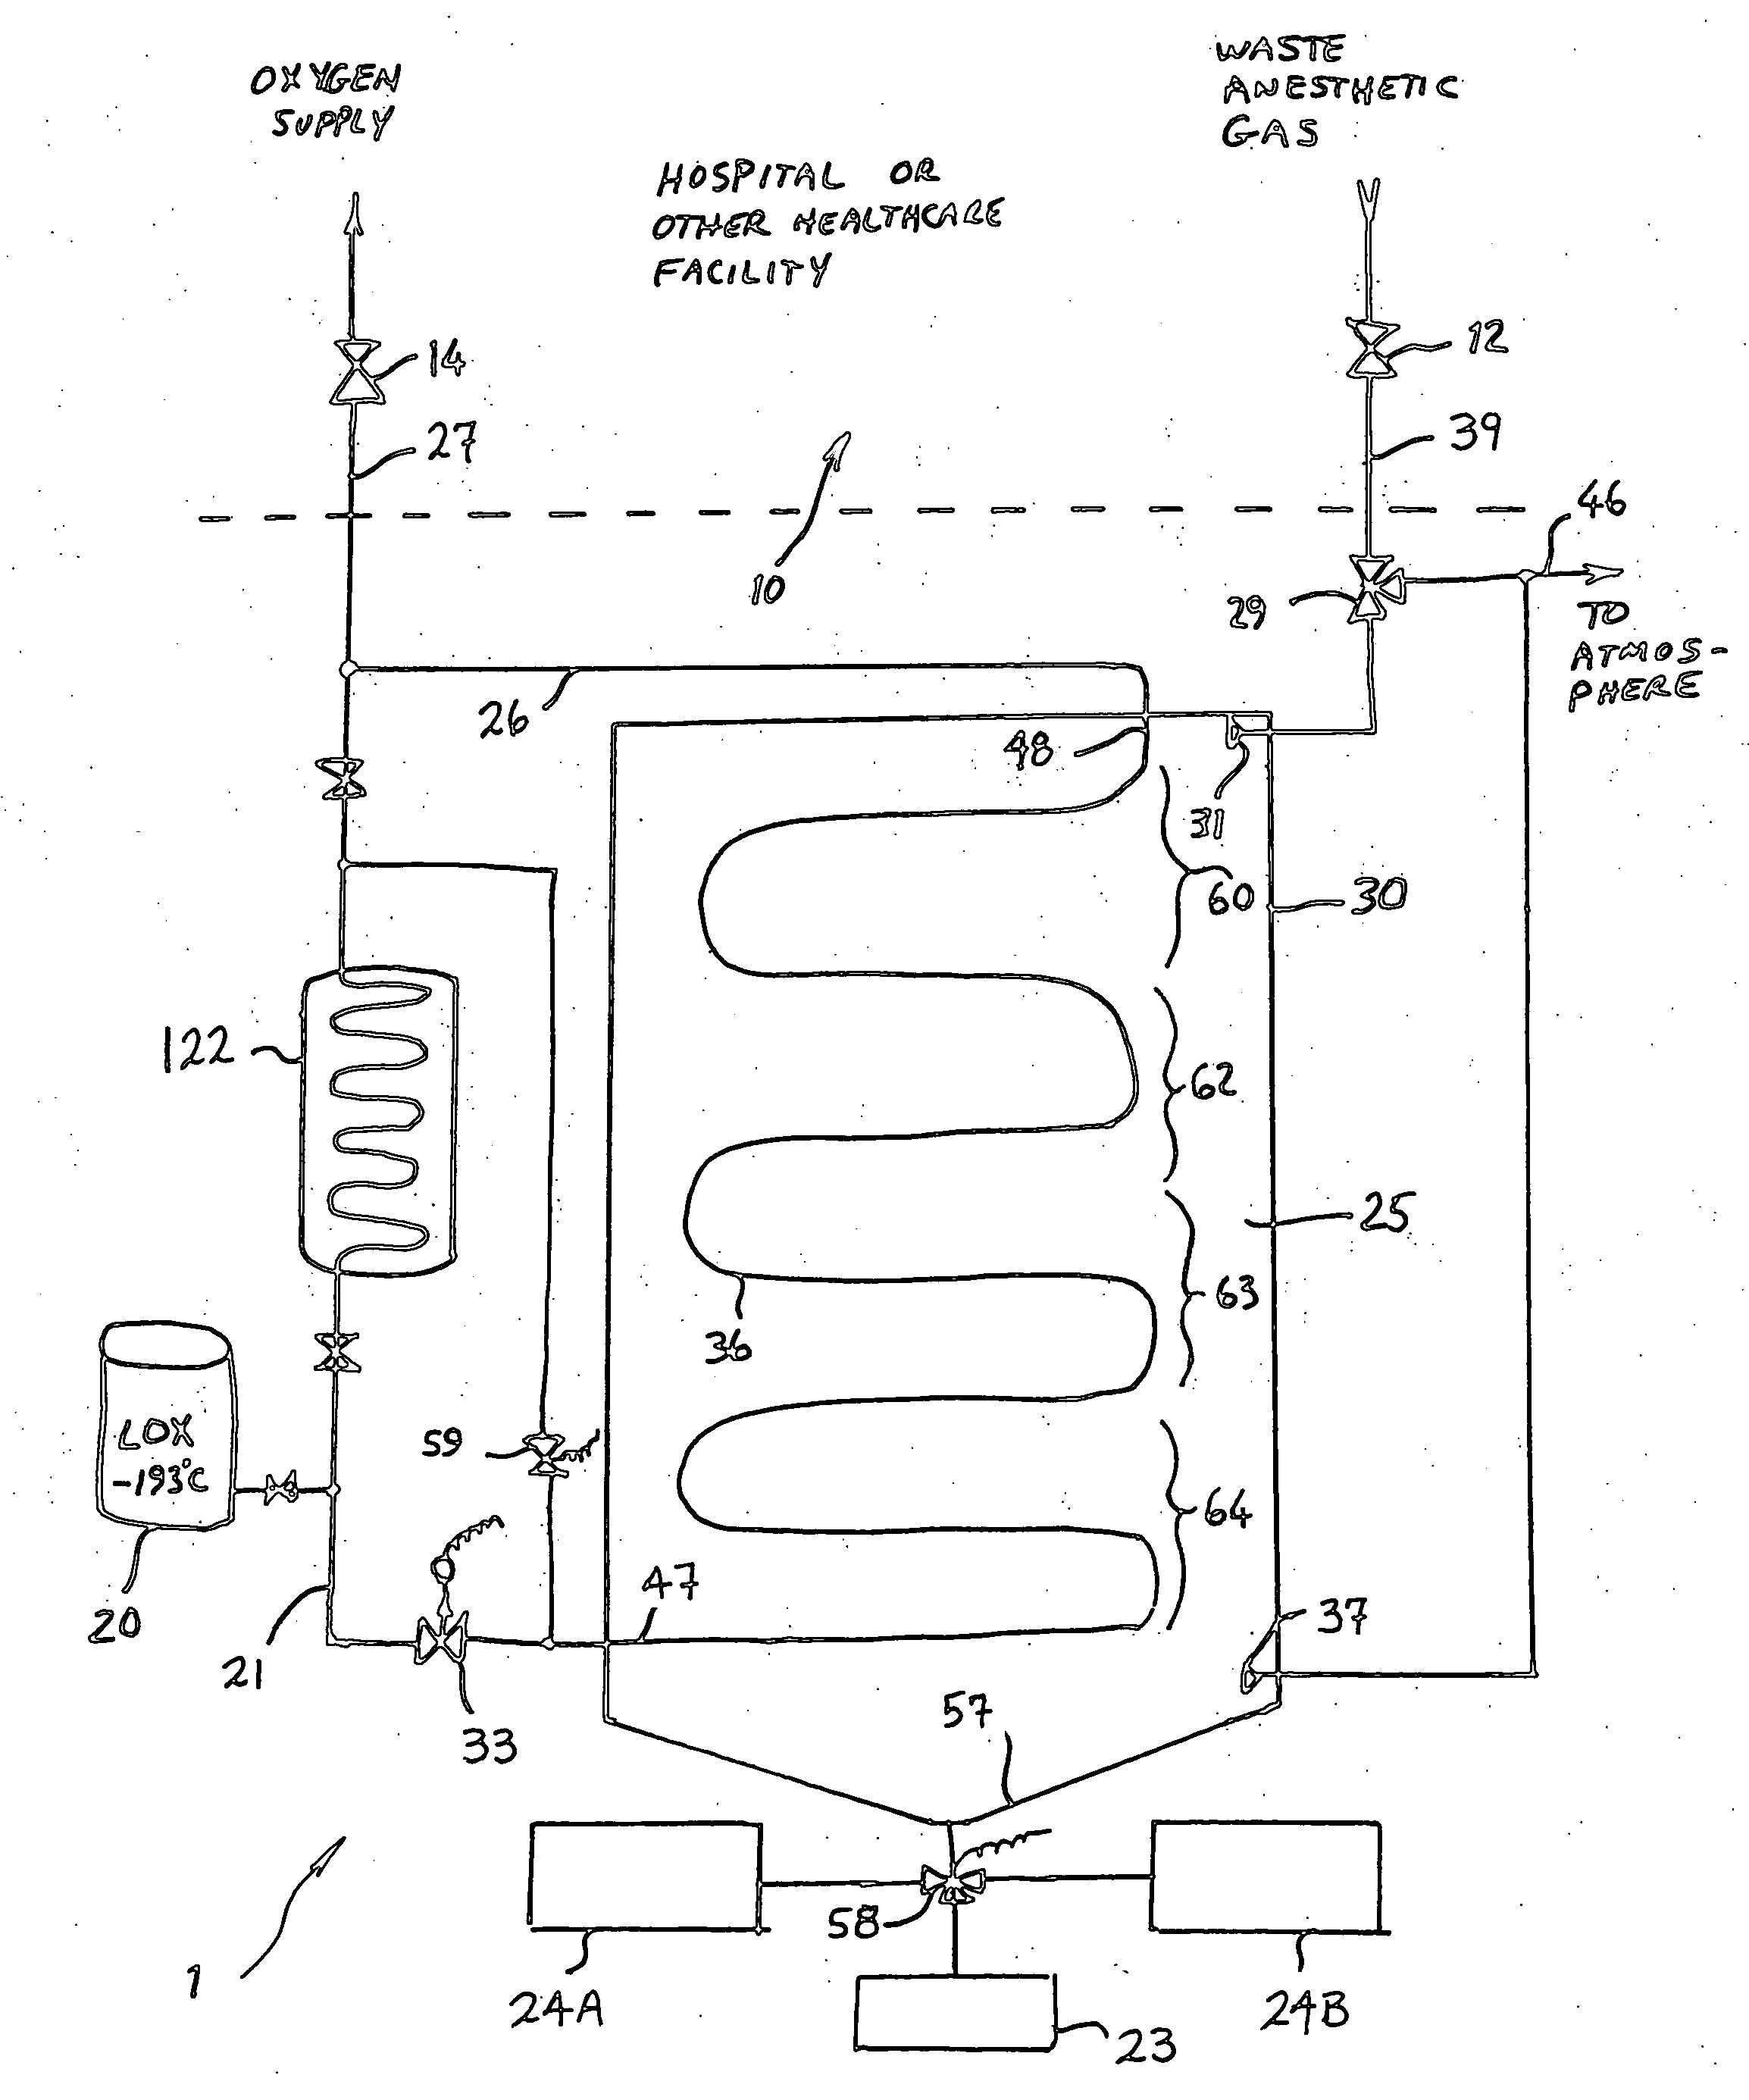 Anesthetic gas reclamation system and method